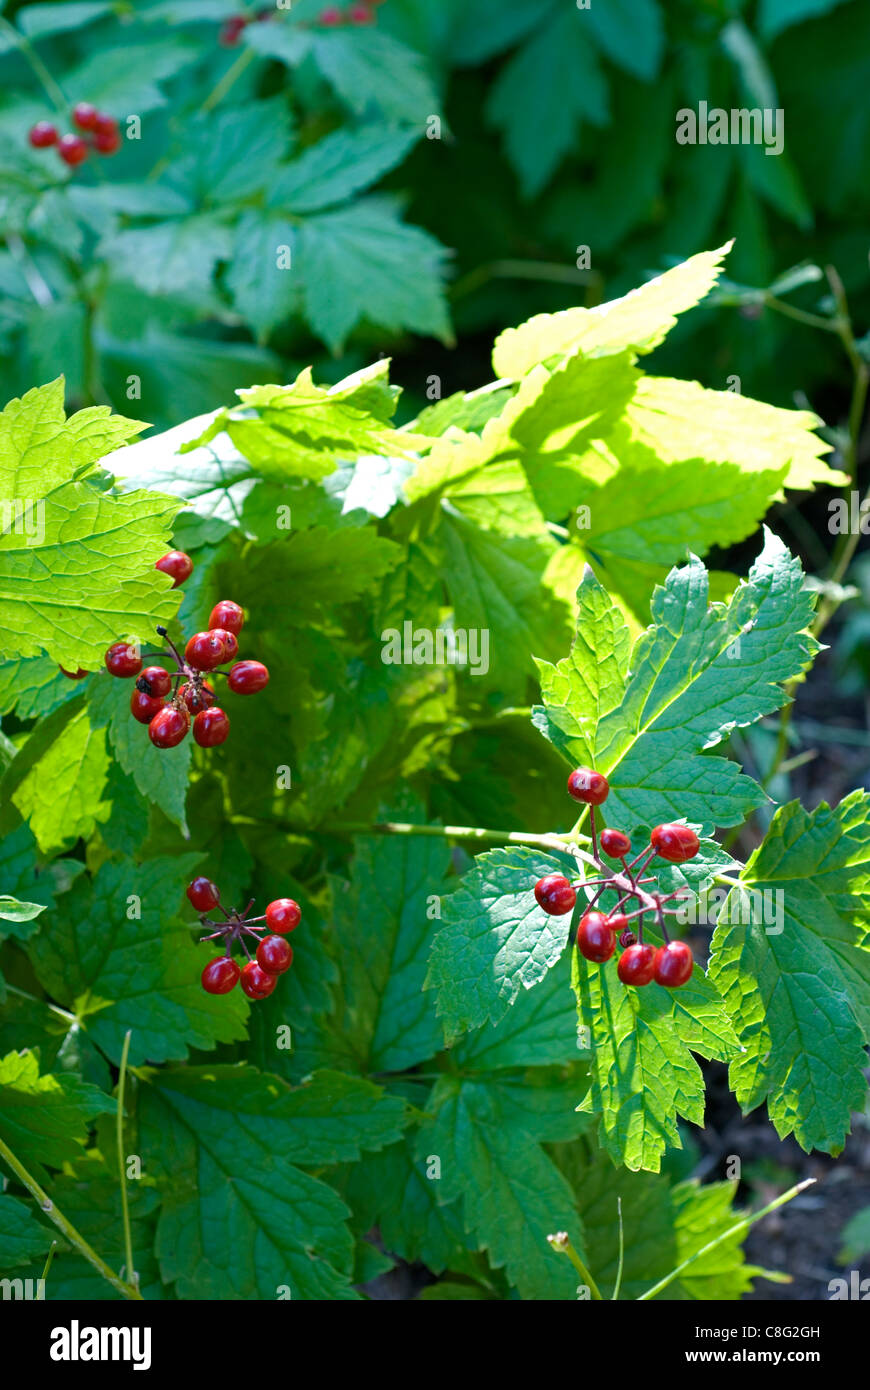 Vertical image of wild, poisonous baneberries with some of the plant's leaves backlit. Shallow depth of field. Stock Photo